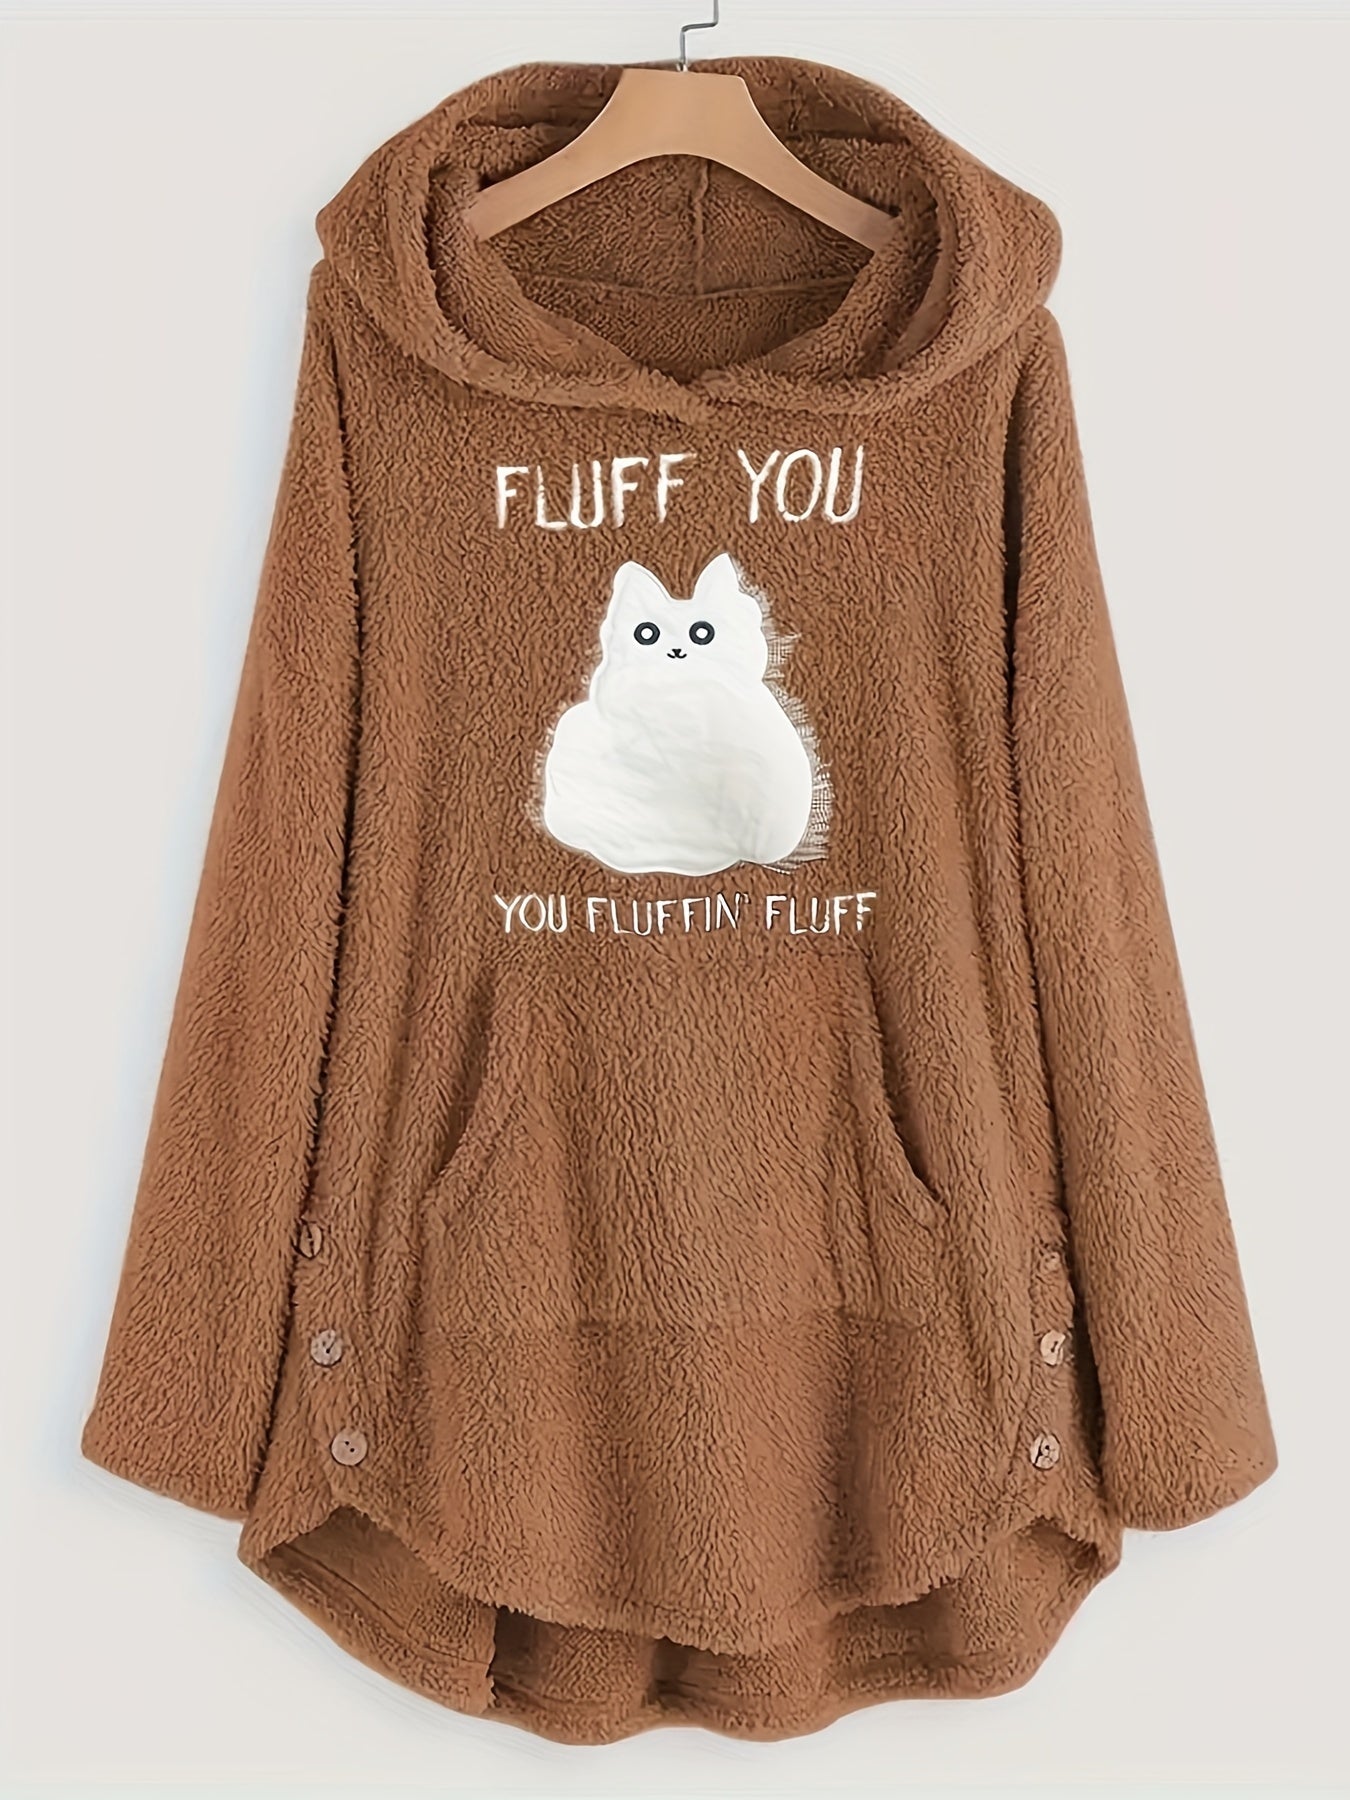 A brown, long-sleeve, fleece hoodie with a hood and front pockets. This Maramalive™ Plus Size Casual Sweatshirt, Women's Plus Slogan & Cat Print Fleece Button Decor Long Sleeve Cat Ear Button Decor Sweatshirt With Pockets features an illustration of a fluffy white cat with the text "Fluff You, You Fluffin' Fluff" on the front, designed in a charming cartoon pattern.